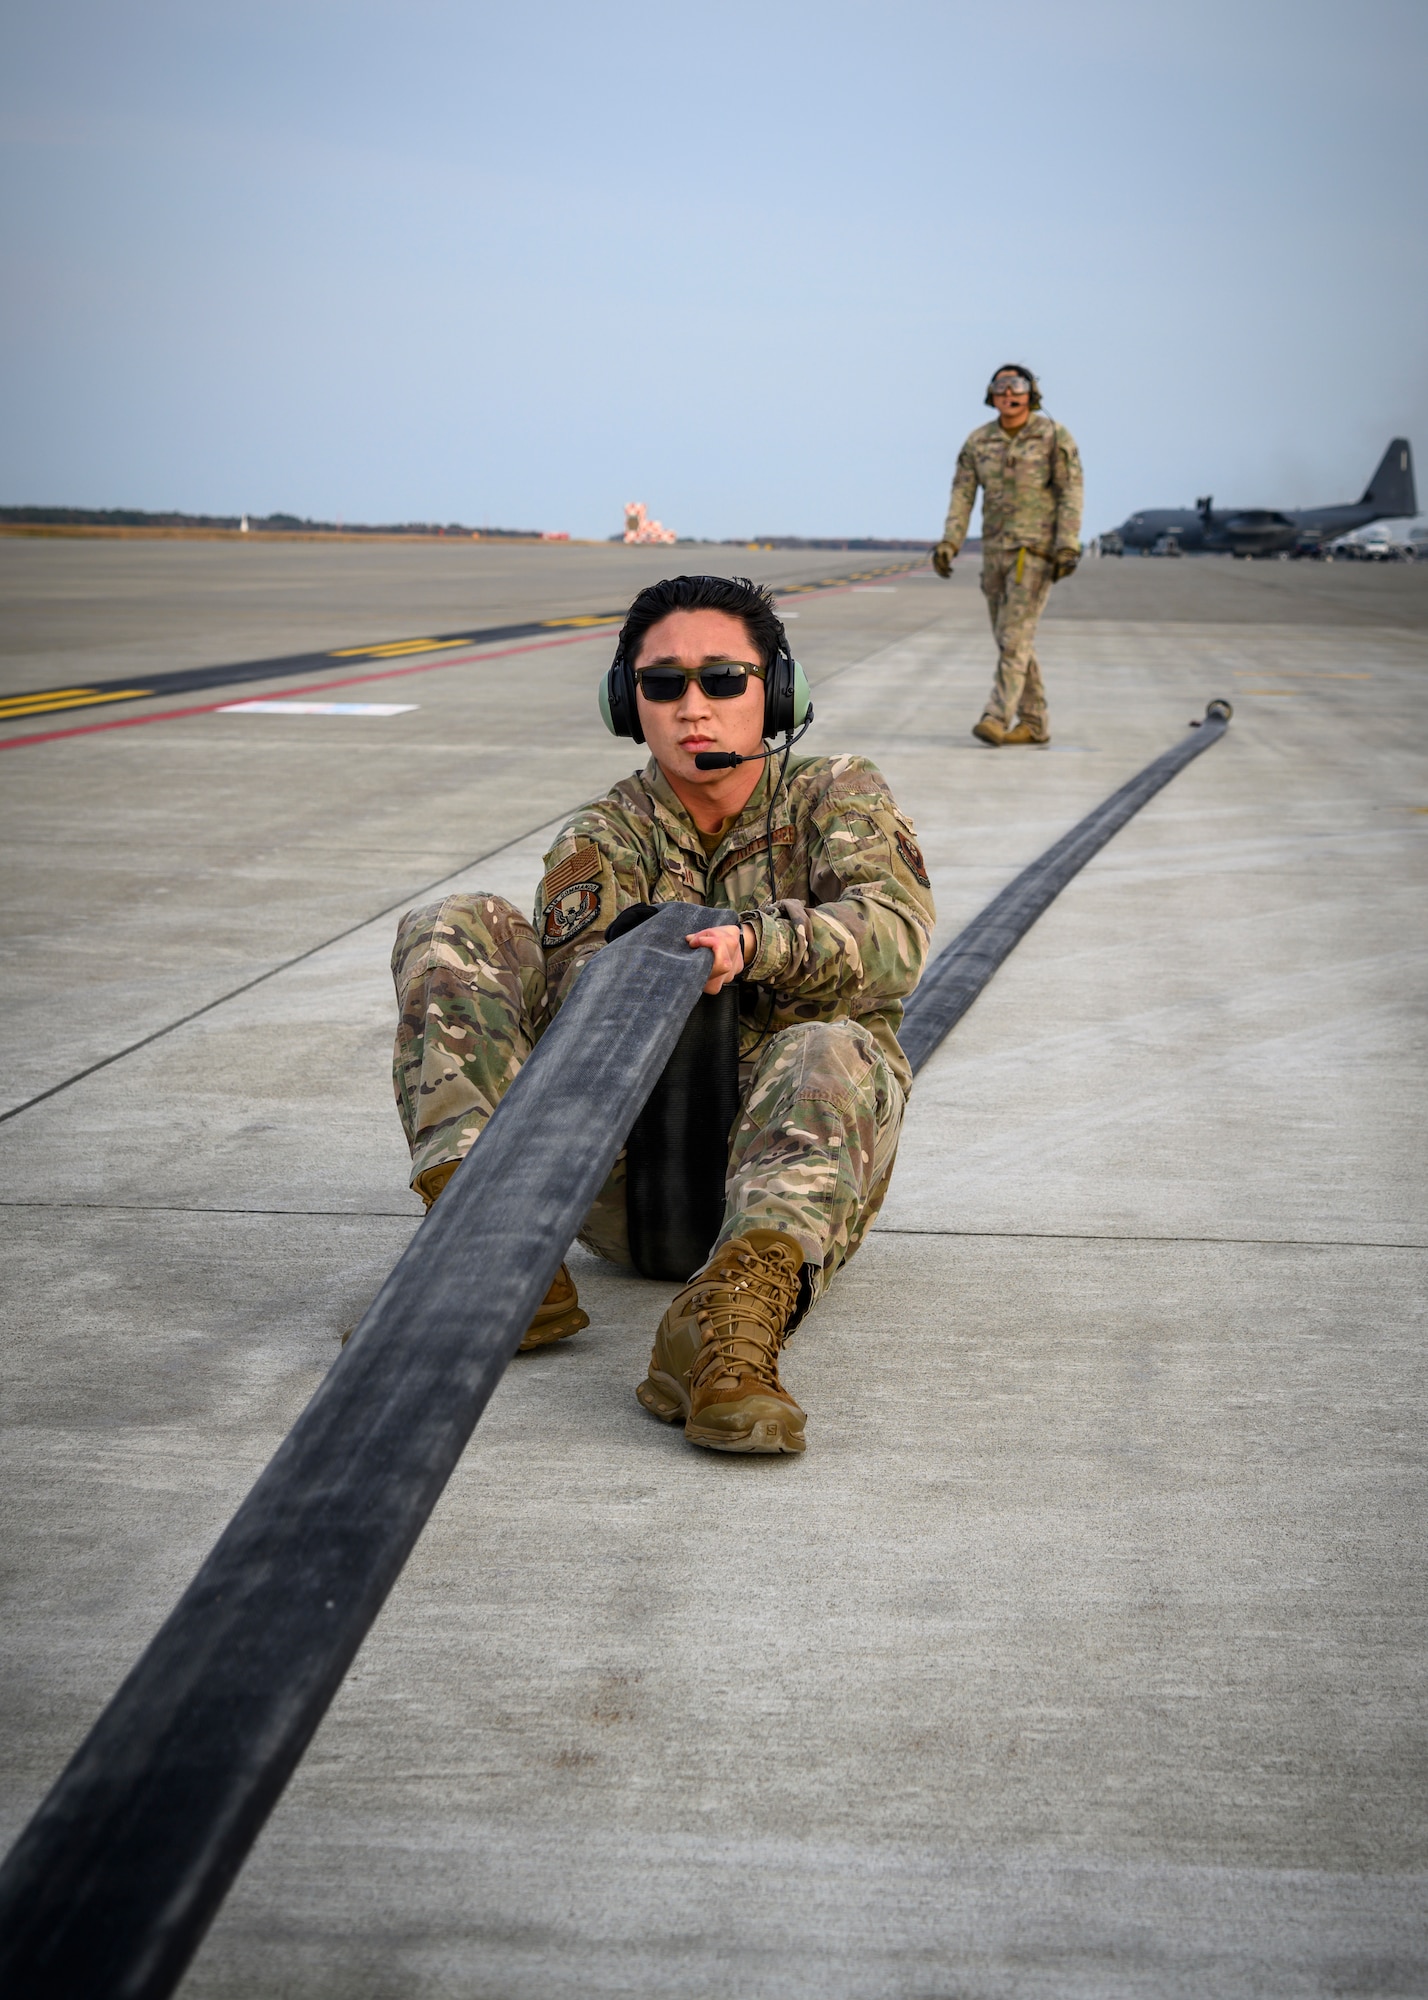 A U.S. Airman with the 1st Special Operations Squadron from Kadena Air Base, Japan, holds a fuel hose steady during a forward area refueling point (FARP) training at Misawa Air Base, Japan, Nov. 18, 2020. With FARP support, any accessible airfield or island can be used to replenish aircraft and get them back to the fight, delivering airpower lethality. (U.S. Air Force photo by Airman 1st Class China M. Shock)